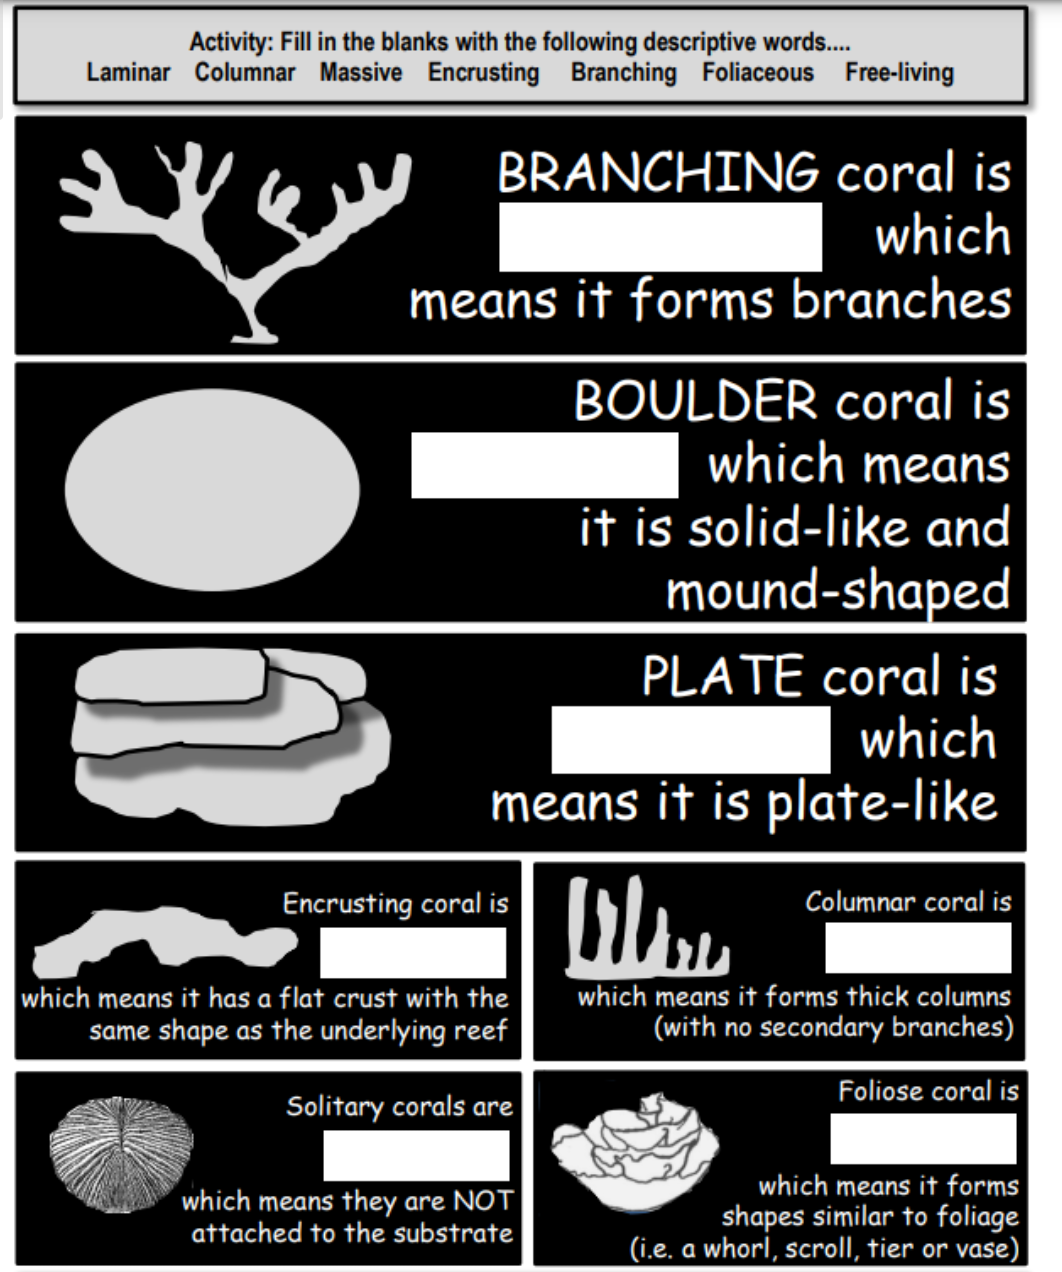 Activity: Fill in the blanks with the following descriptive words...
Laminar Columnar Massive Encrusting Branching Foliaceous Free-living
BRANCHING coral is
which
means it forms branches
BOULDER coral is
which means
it is solid-like and
mound-shaped
PLATE coral is
which
means it is plate-like
Encrusting coral is
Columnar coral is
which means it has a flat crust with the
same shape as the underlying reef
which means it forms thick columns
(with no secondary branches)
Foliose coral is
Solitary corals are
which means they are NOT
attached to the substrate
which means it forms
shapes similar to foliage
|(i.e. a whorl, scroll, tier or vase)
